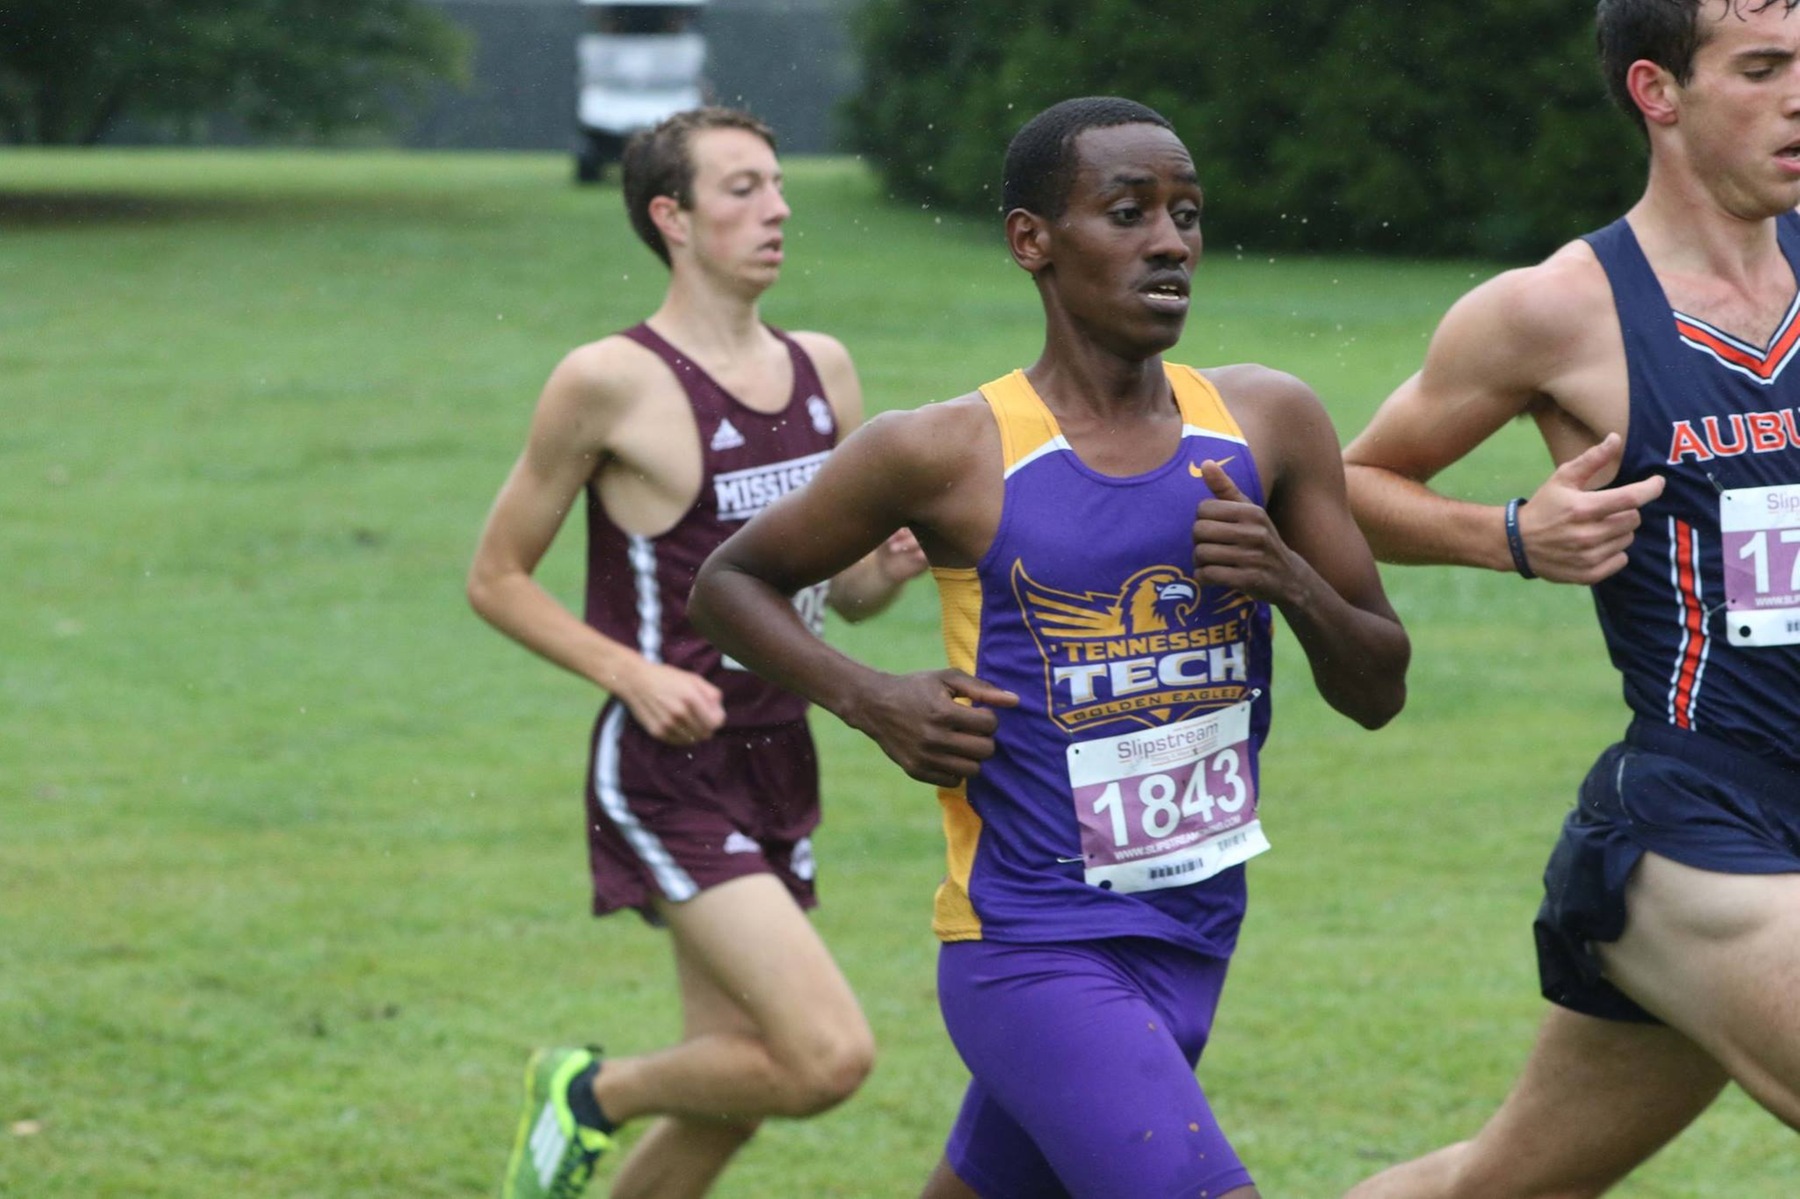 Men's cross country at 12th in latest USTFCCCA South Region rankings